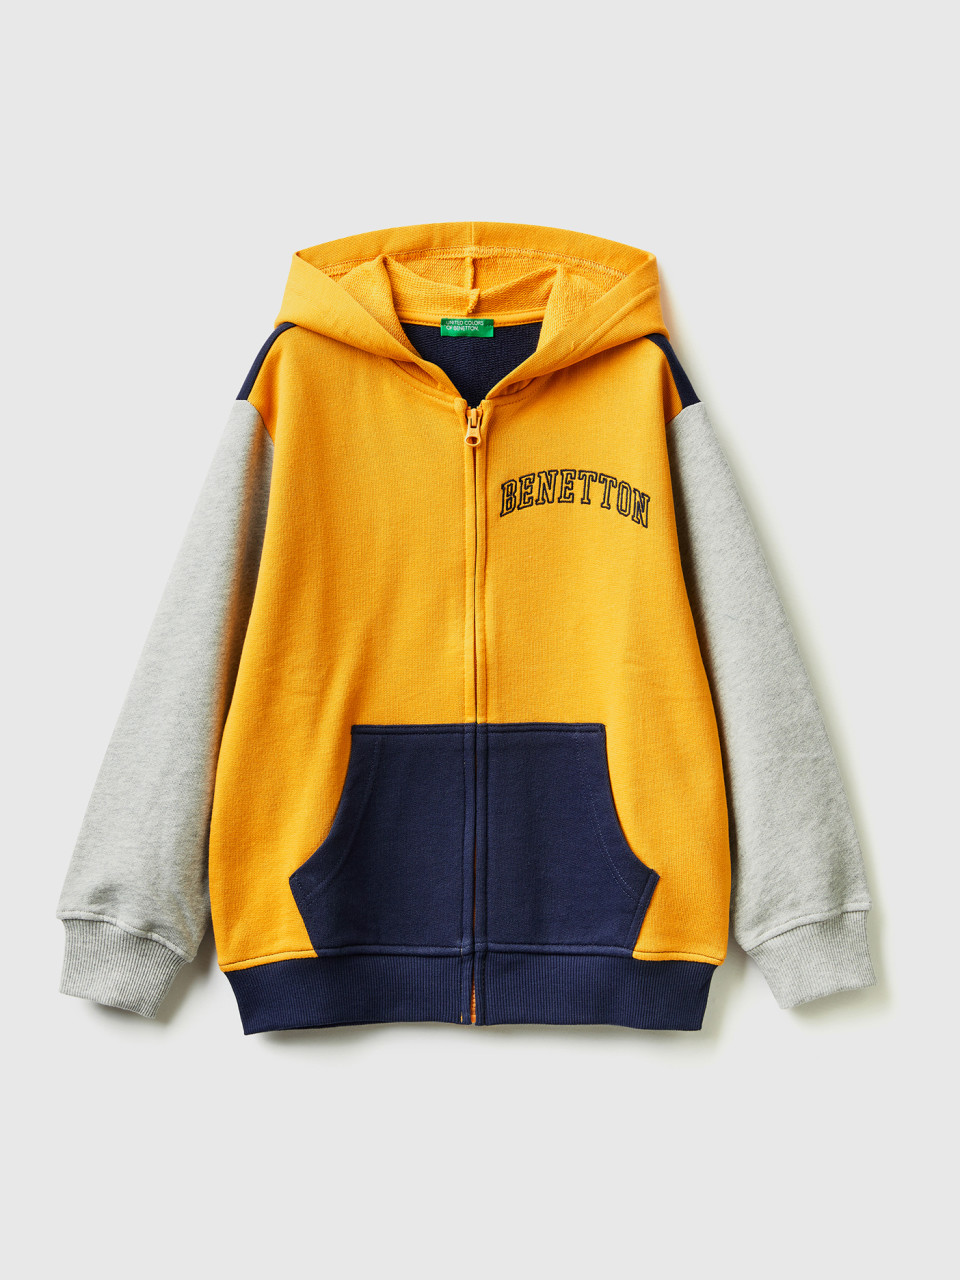 Benetton, Hoodie With Zip And Embroidered Logo, Multi-color, Kids